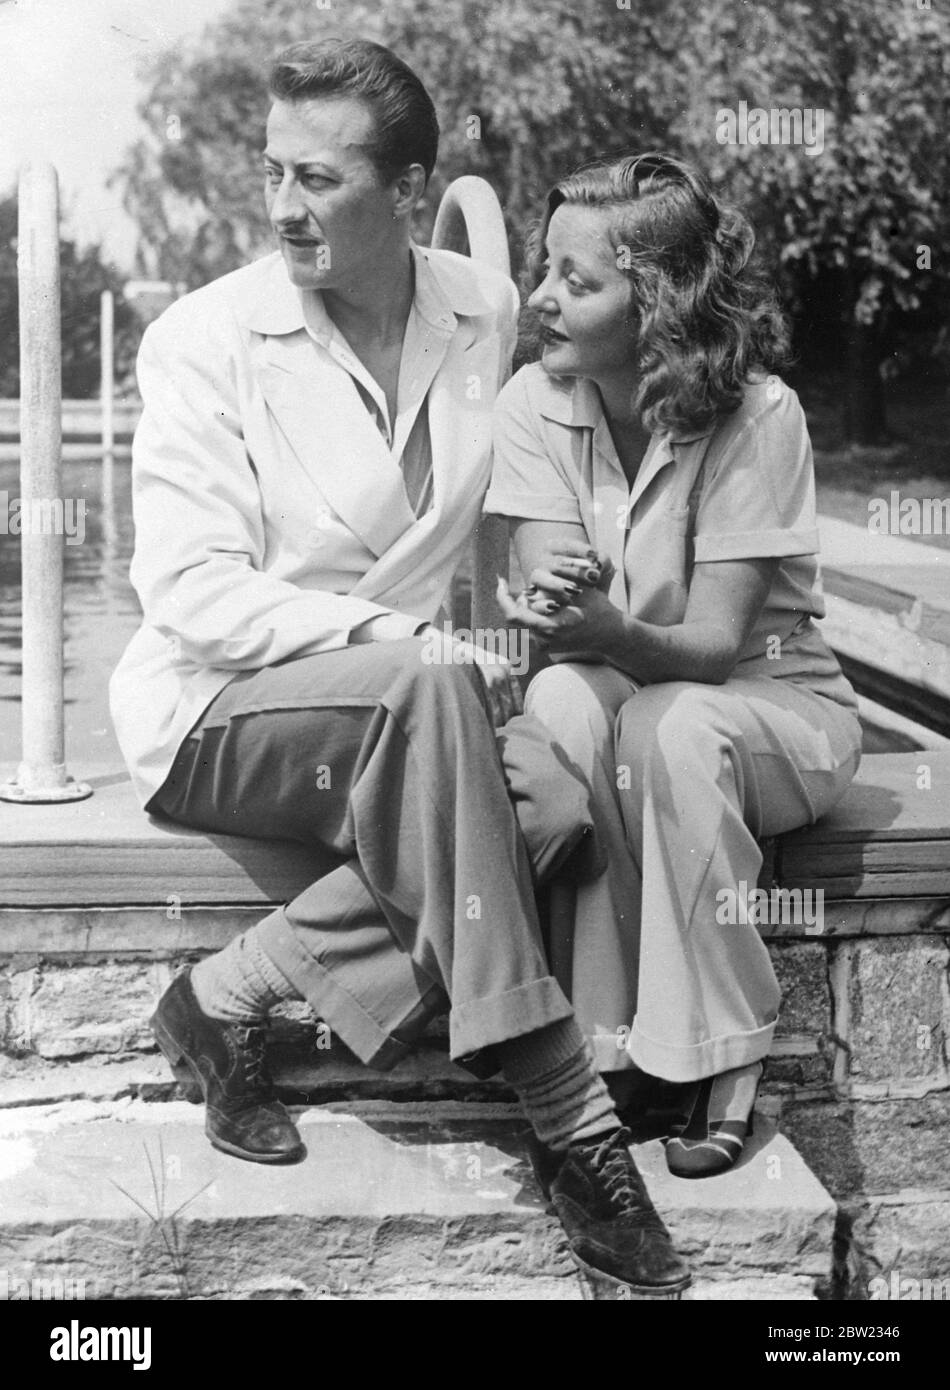 Tallulah Bankhead, the American actress retired to a honeymoon retreat in Norwalk, Connecticut with her bridegroom, Mr John Emery after their night wedding at Jasper, Alabama. The ceremony took place in the home of Miss Bankhead's father, Mr William Brockman Bankhead, speaker of the American house of representatives. 10 September 1937 Stock Photo